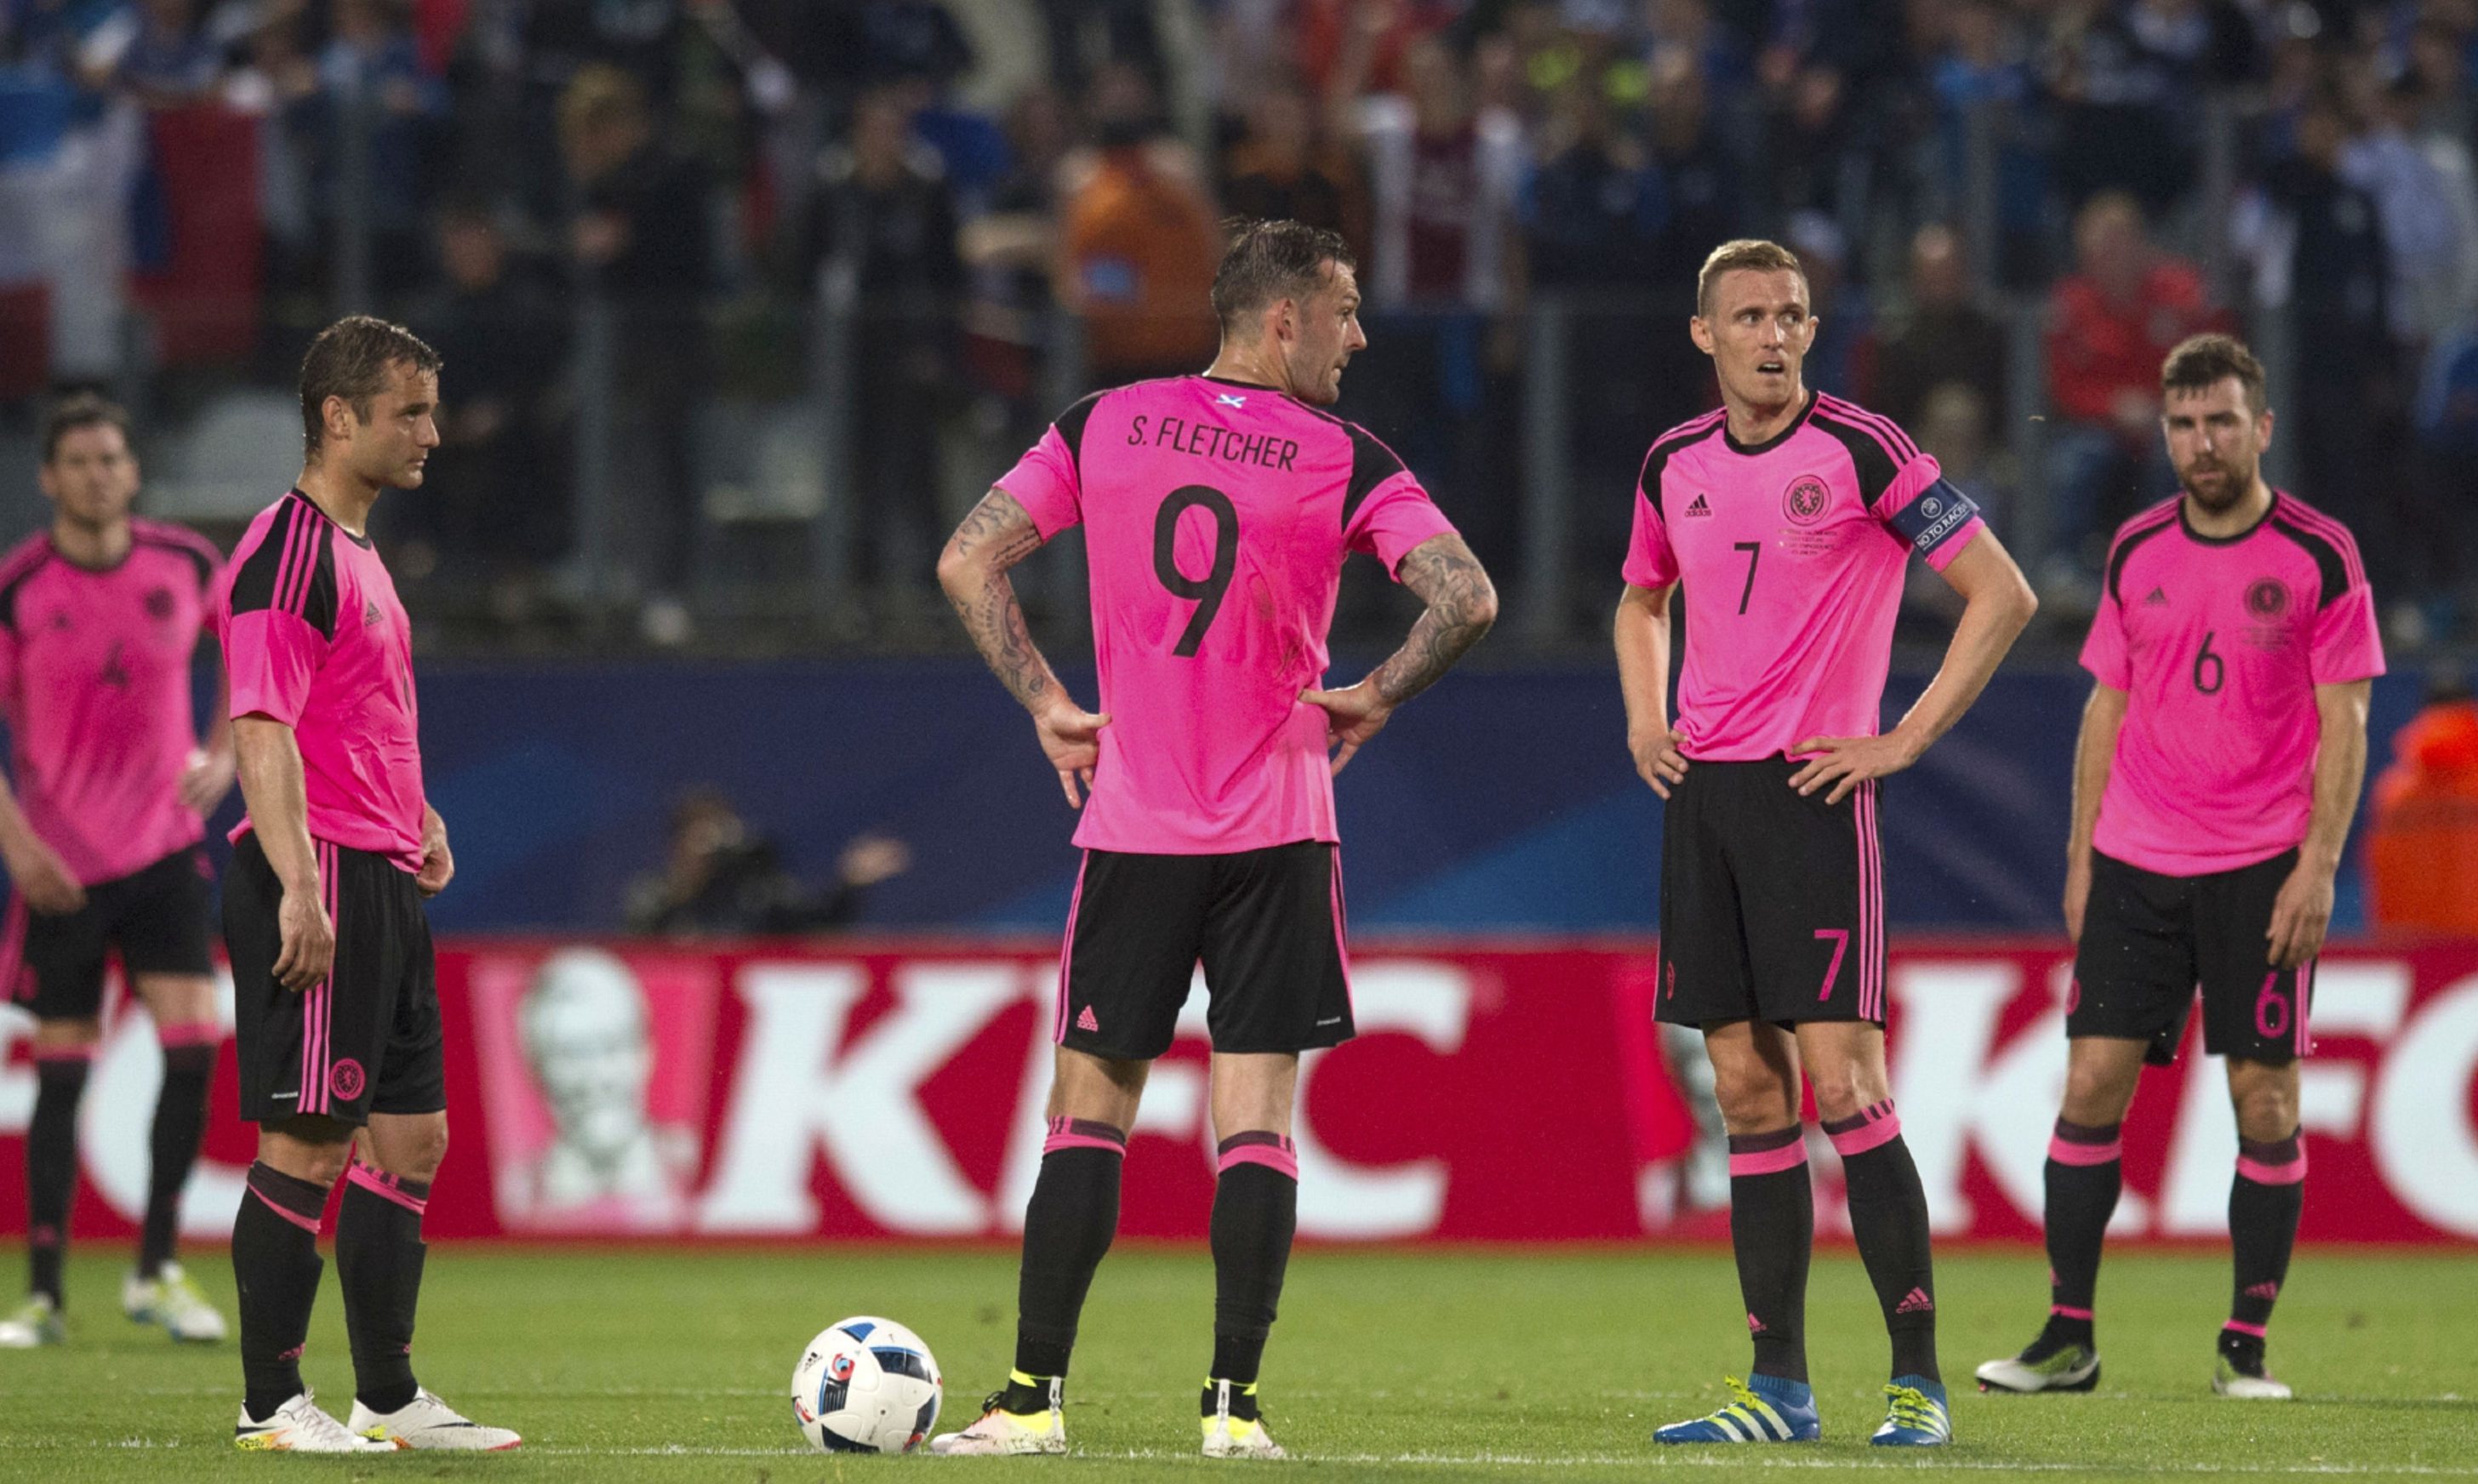 The Scots players look dejected after conceding a second goal to the French.